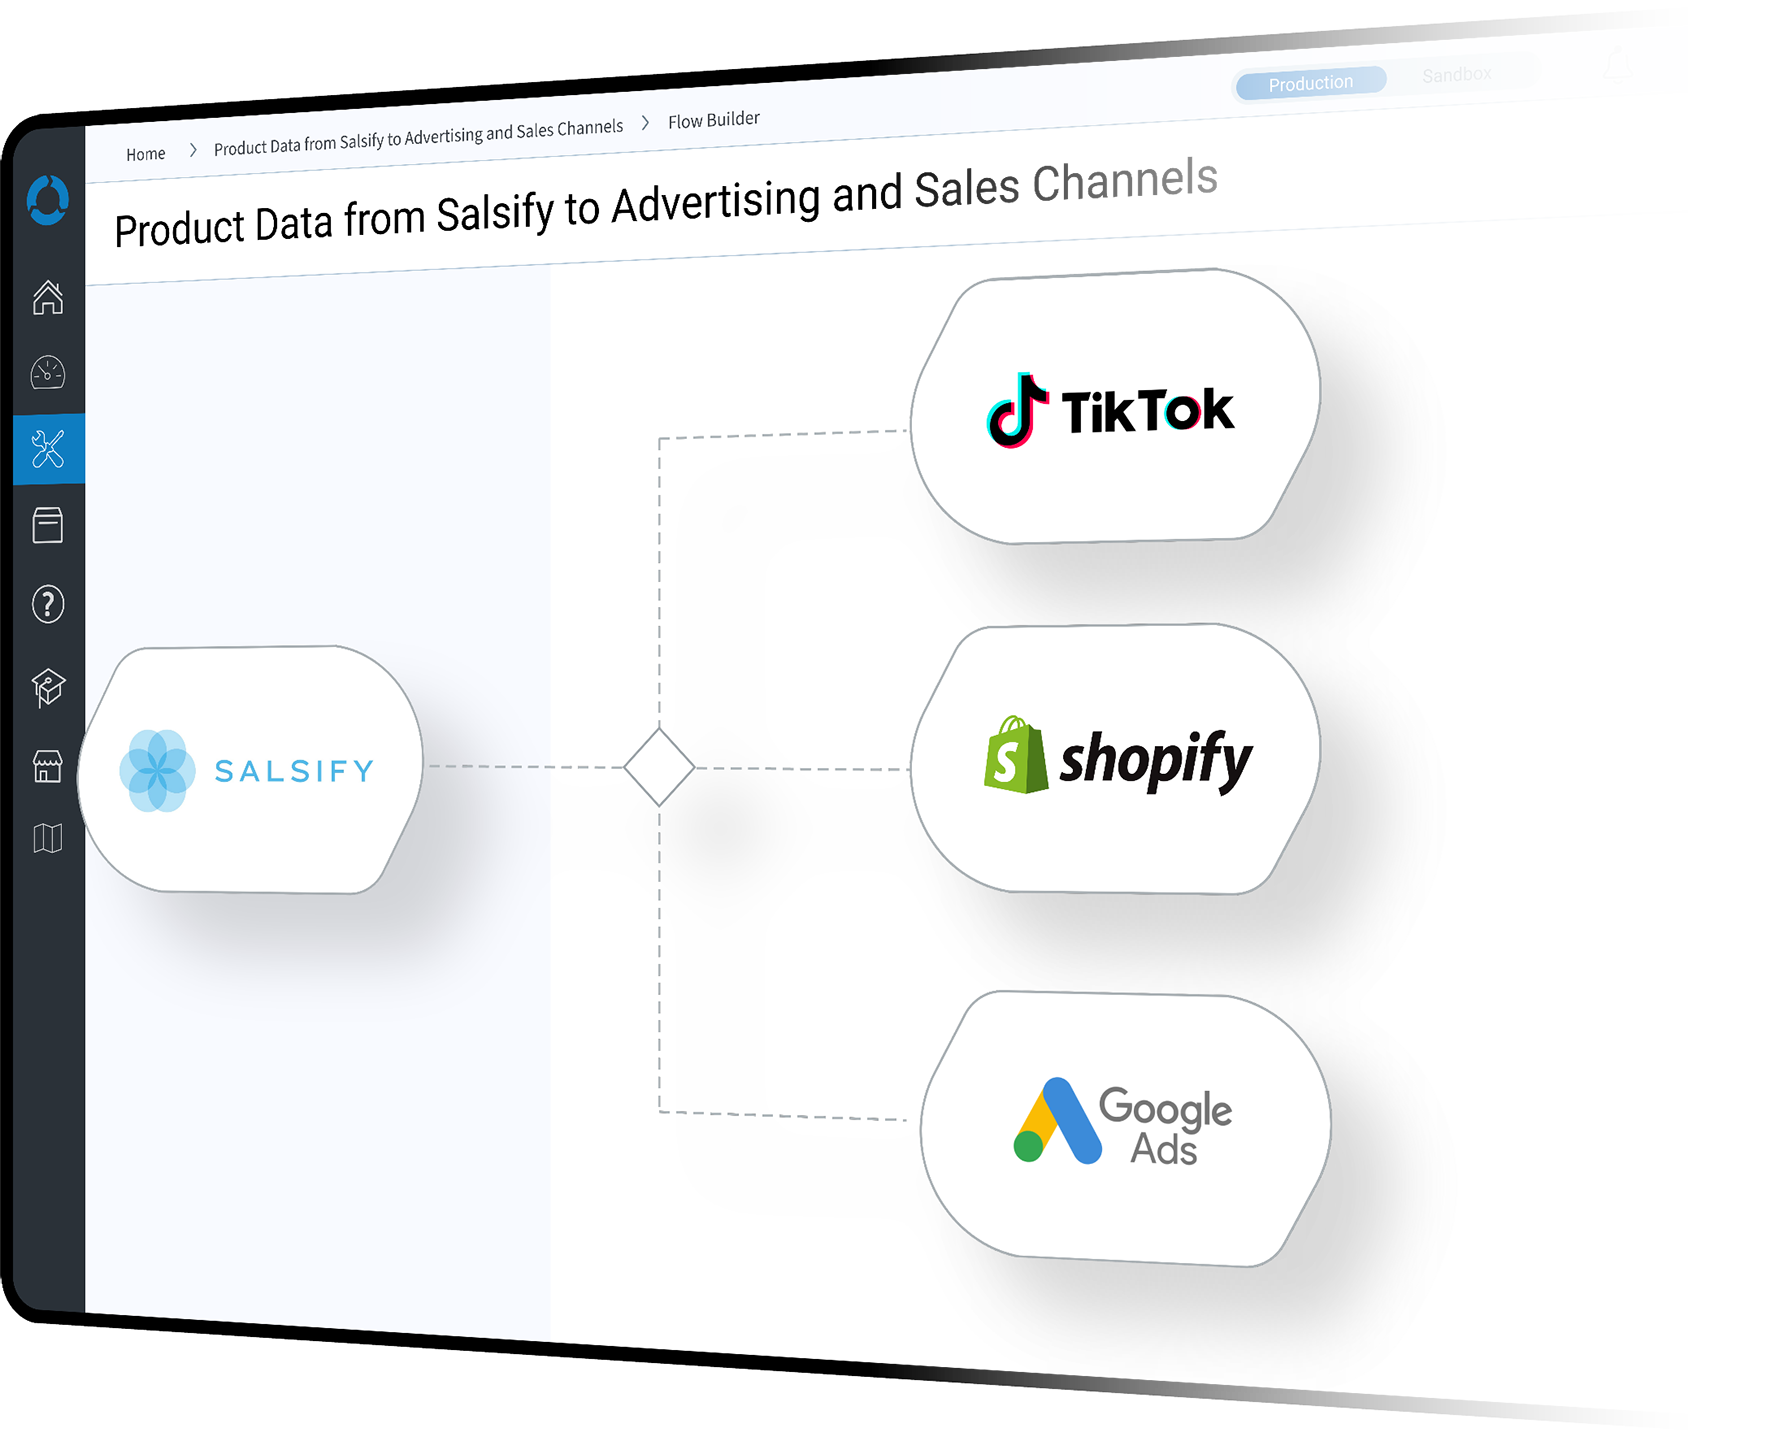 Marketing Automation Product Data from Salsify to Advertising and Sales Channels